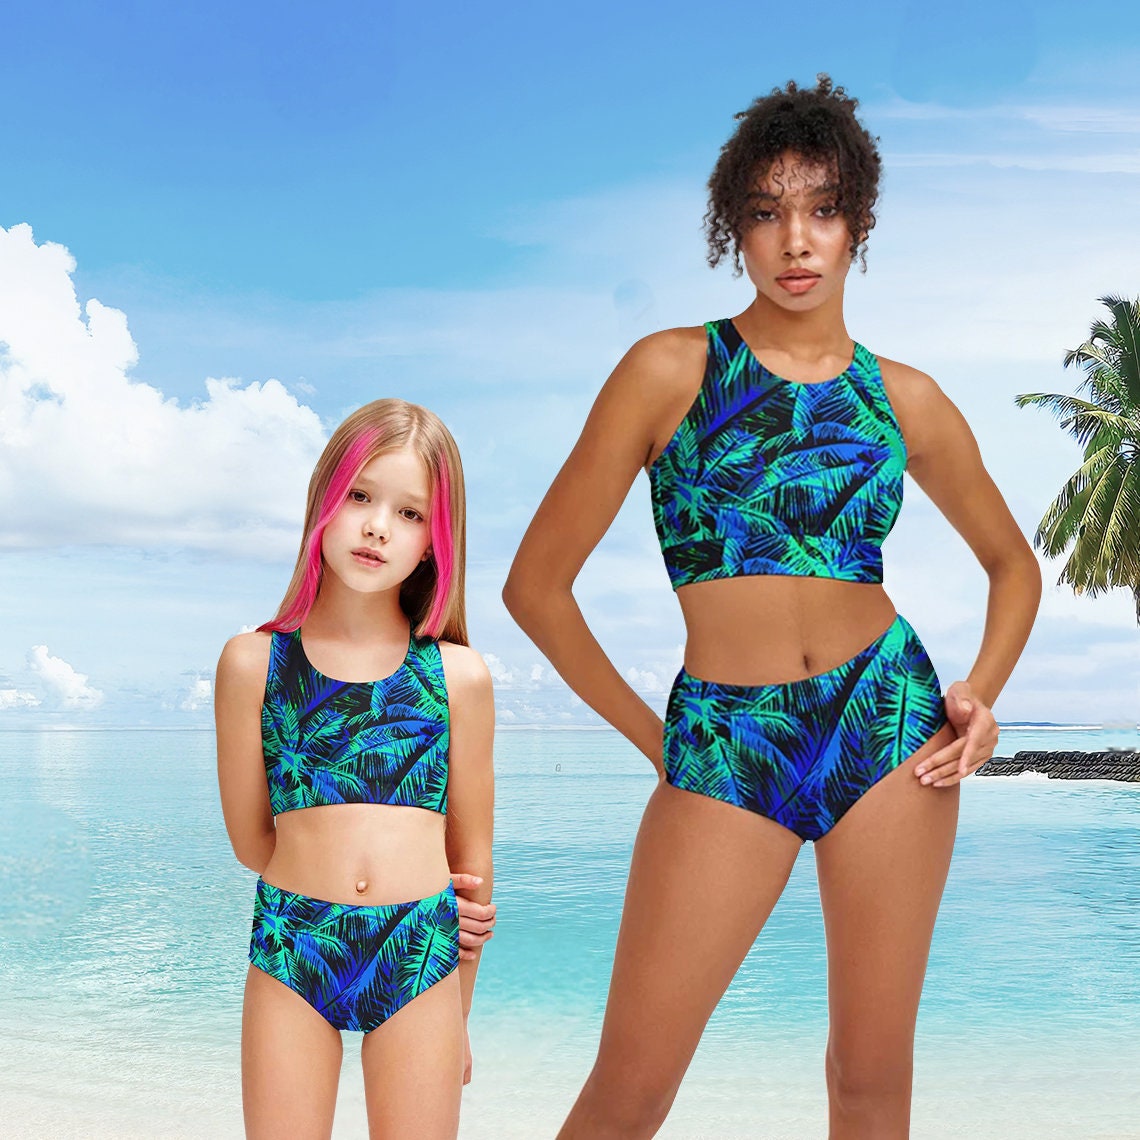 Electric Jungle Navy Blue Two-Piece Sporty Swimsuits - Mommy and Me